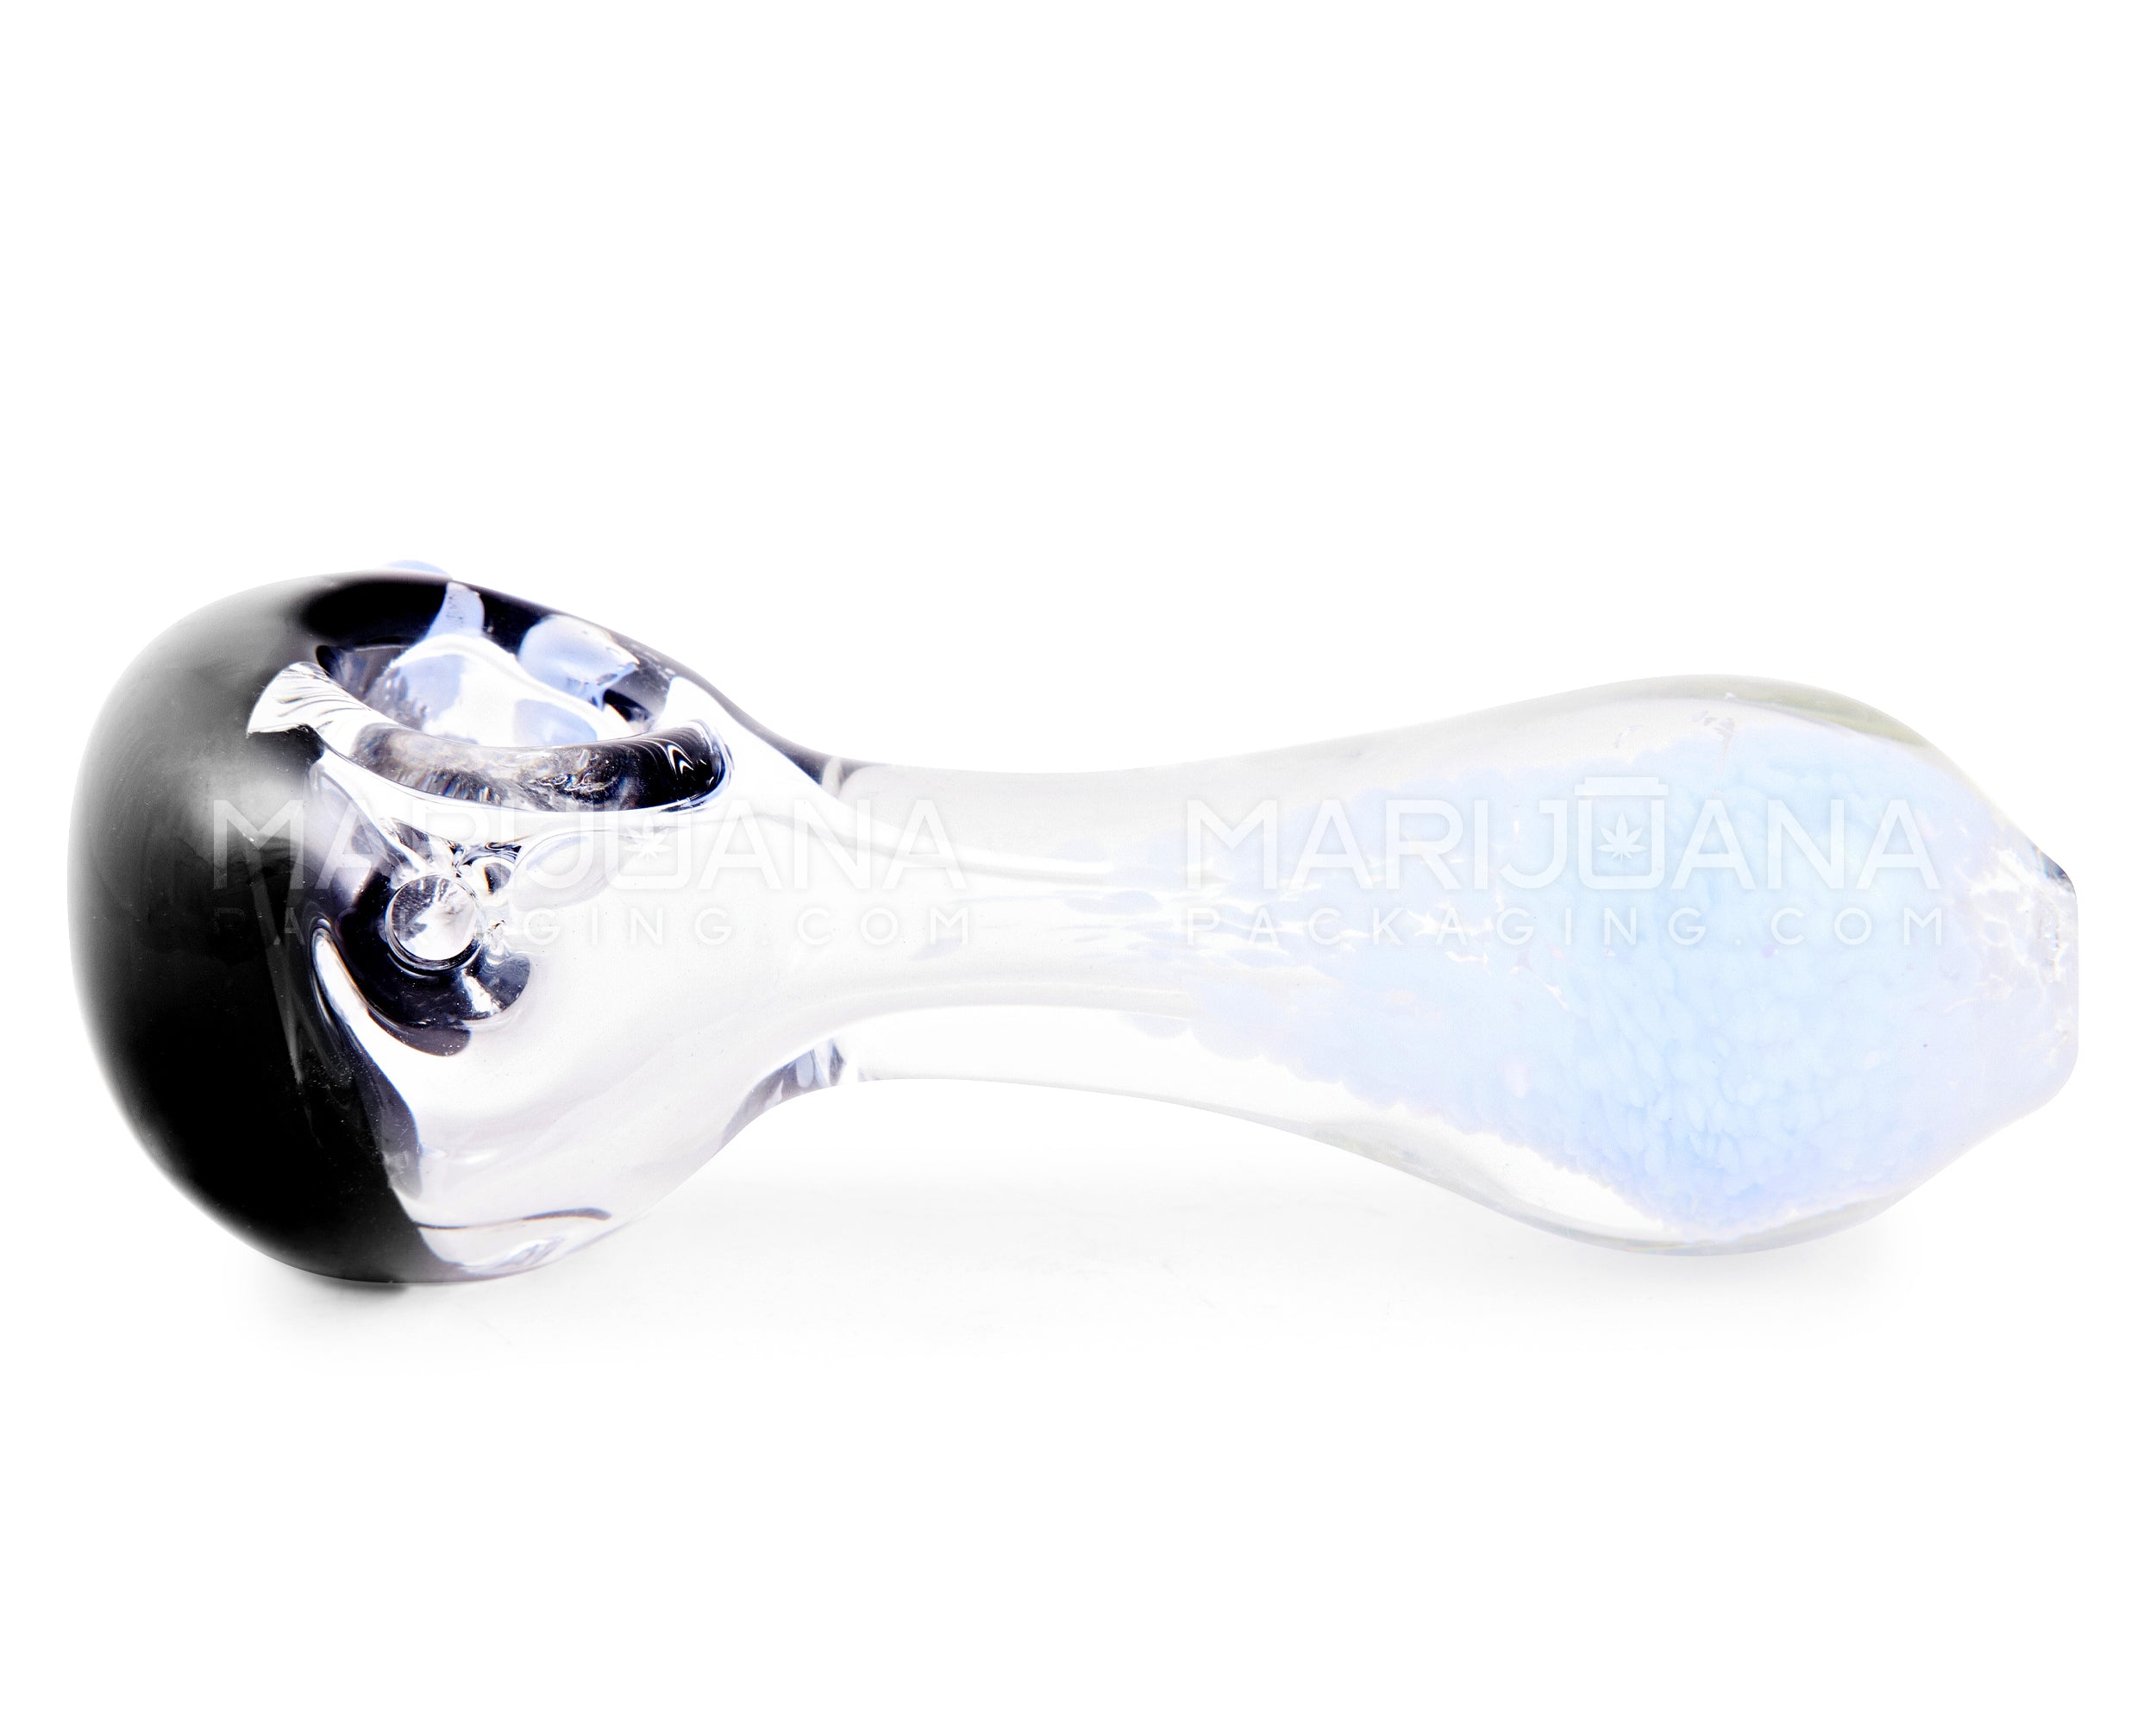 Frit Spoon Hand Pipe w/ Painted Head & Triple Knockers | 4.5in Long - Glass - Assorted - 5